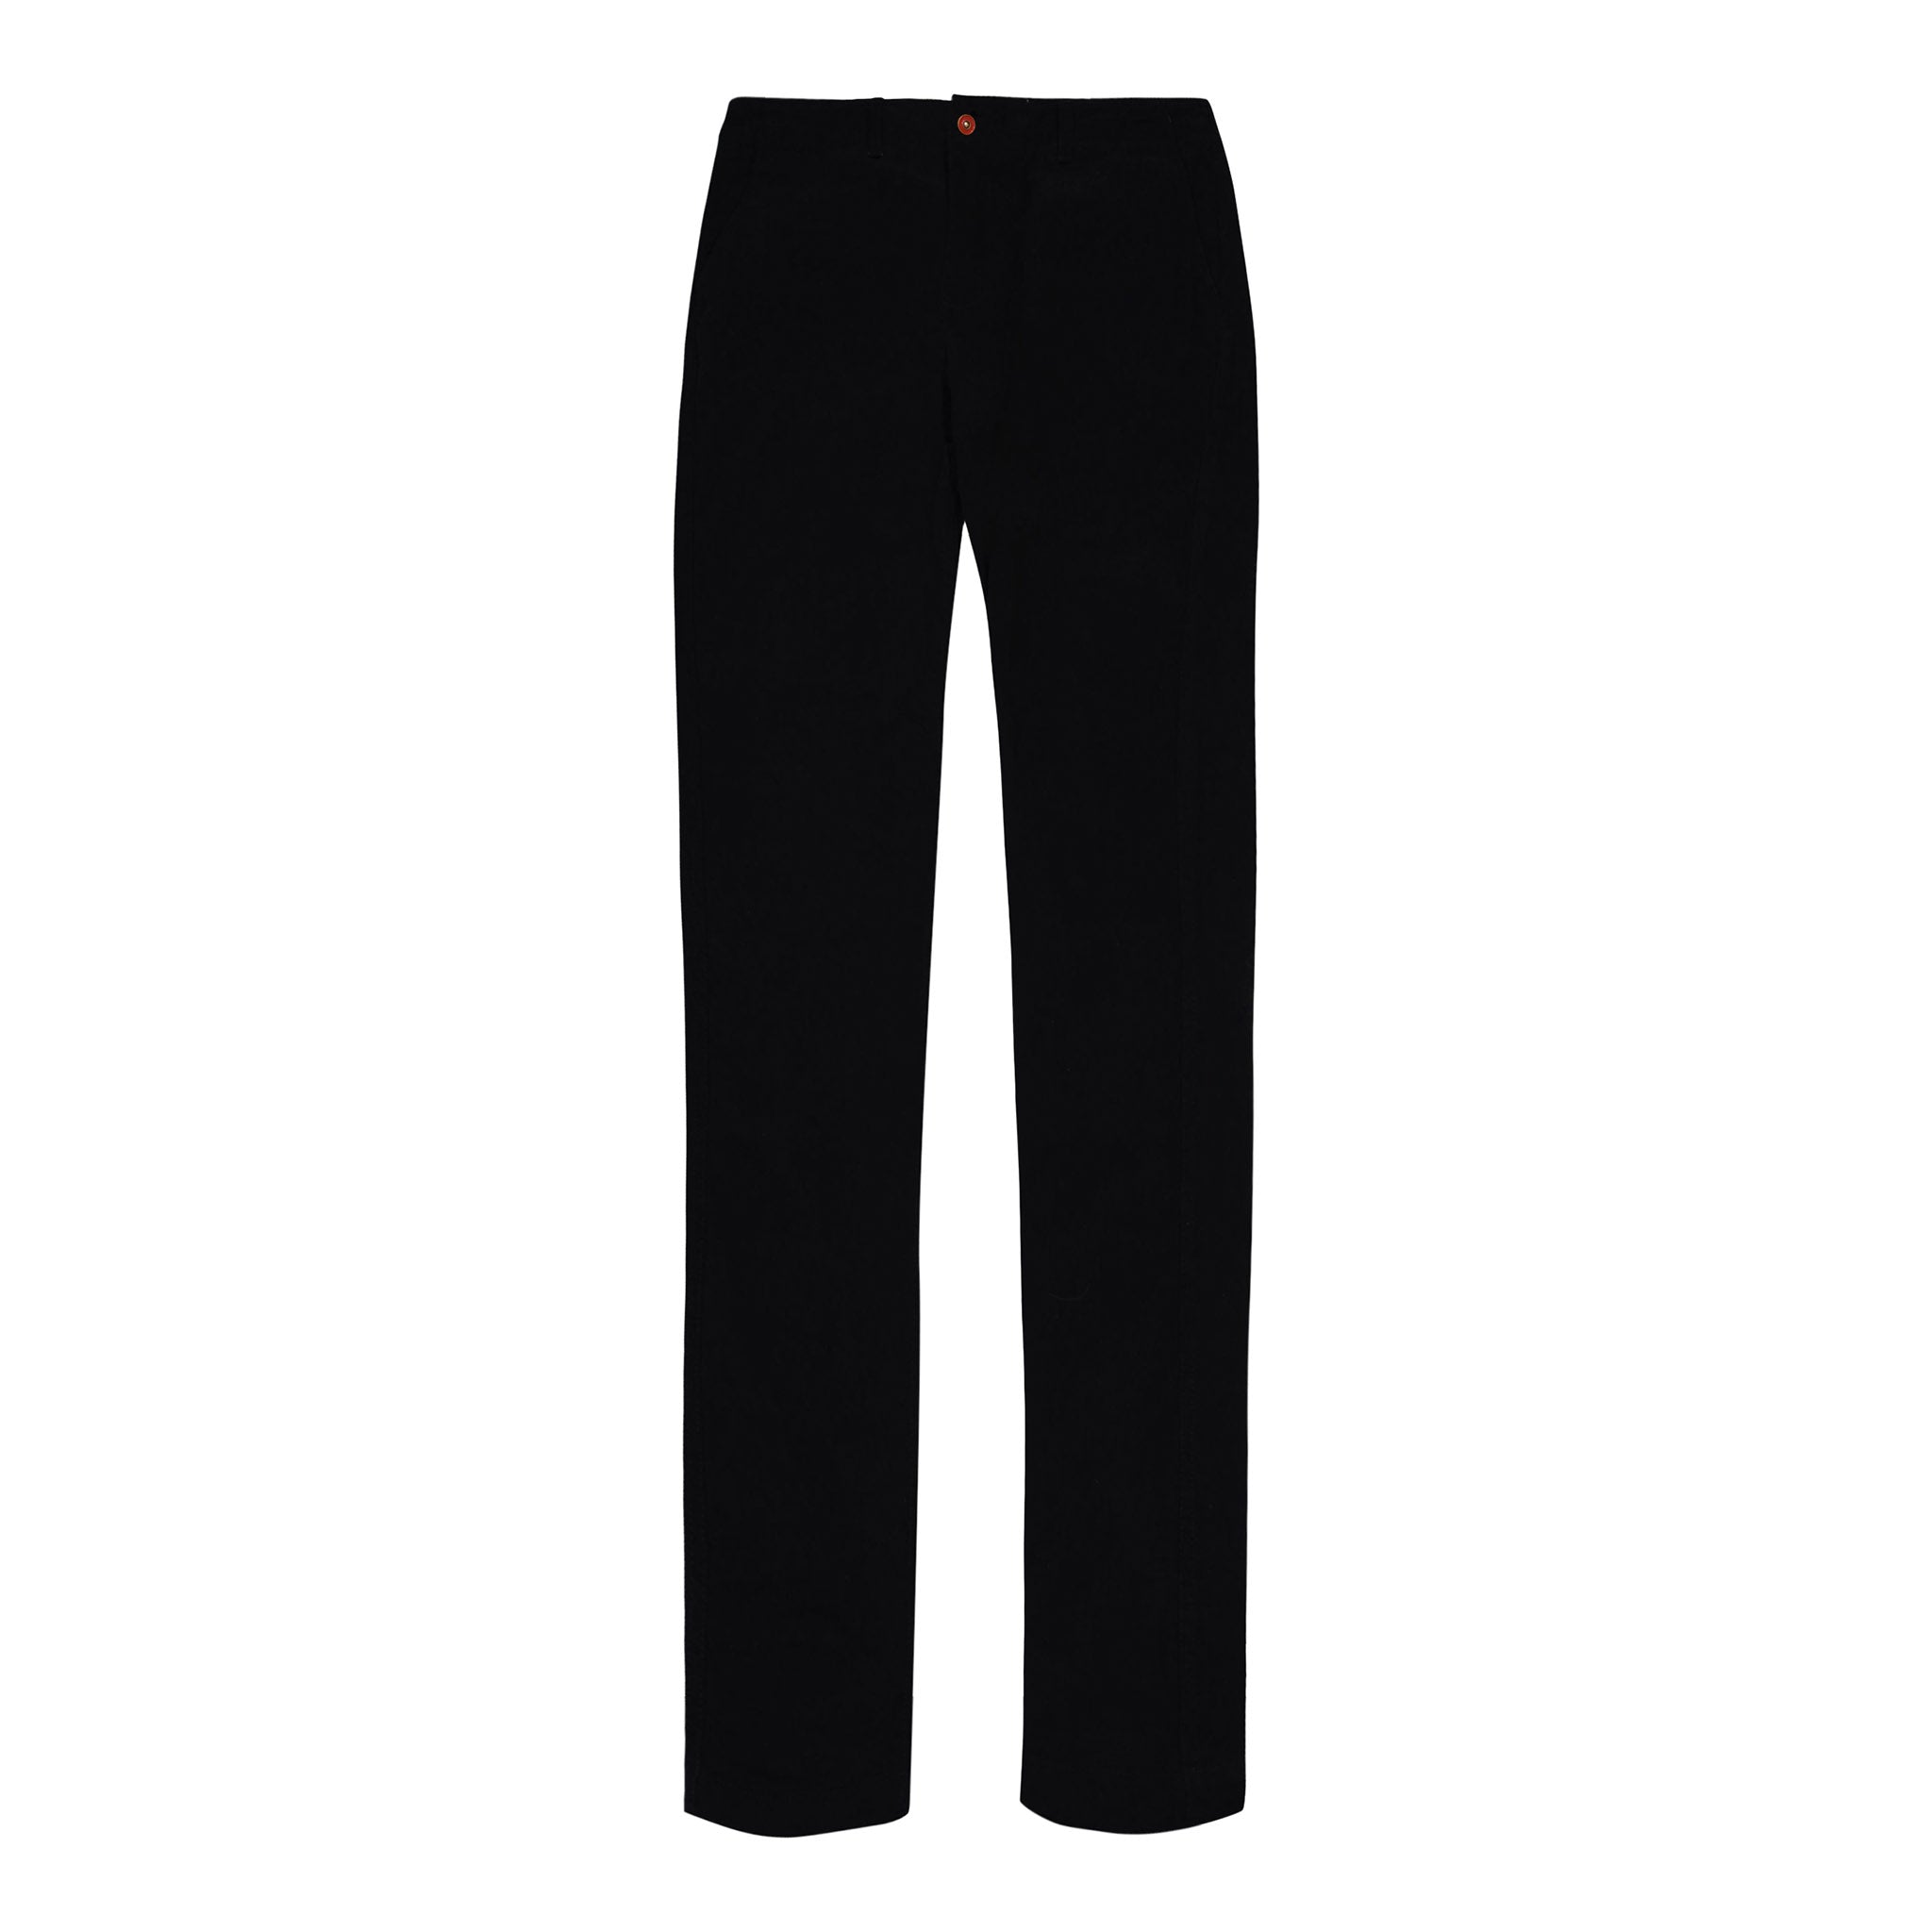 1of1 his casual trousers black